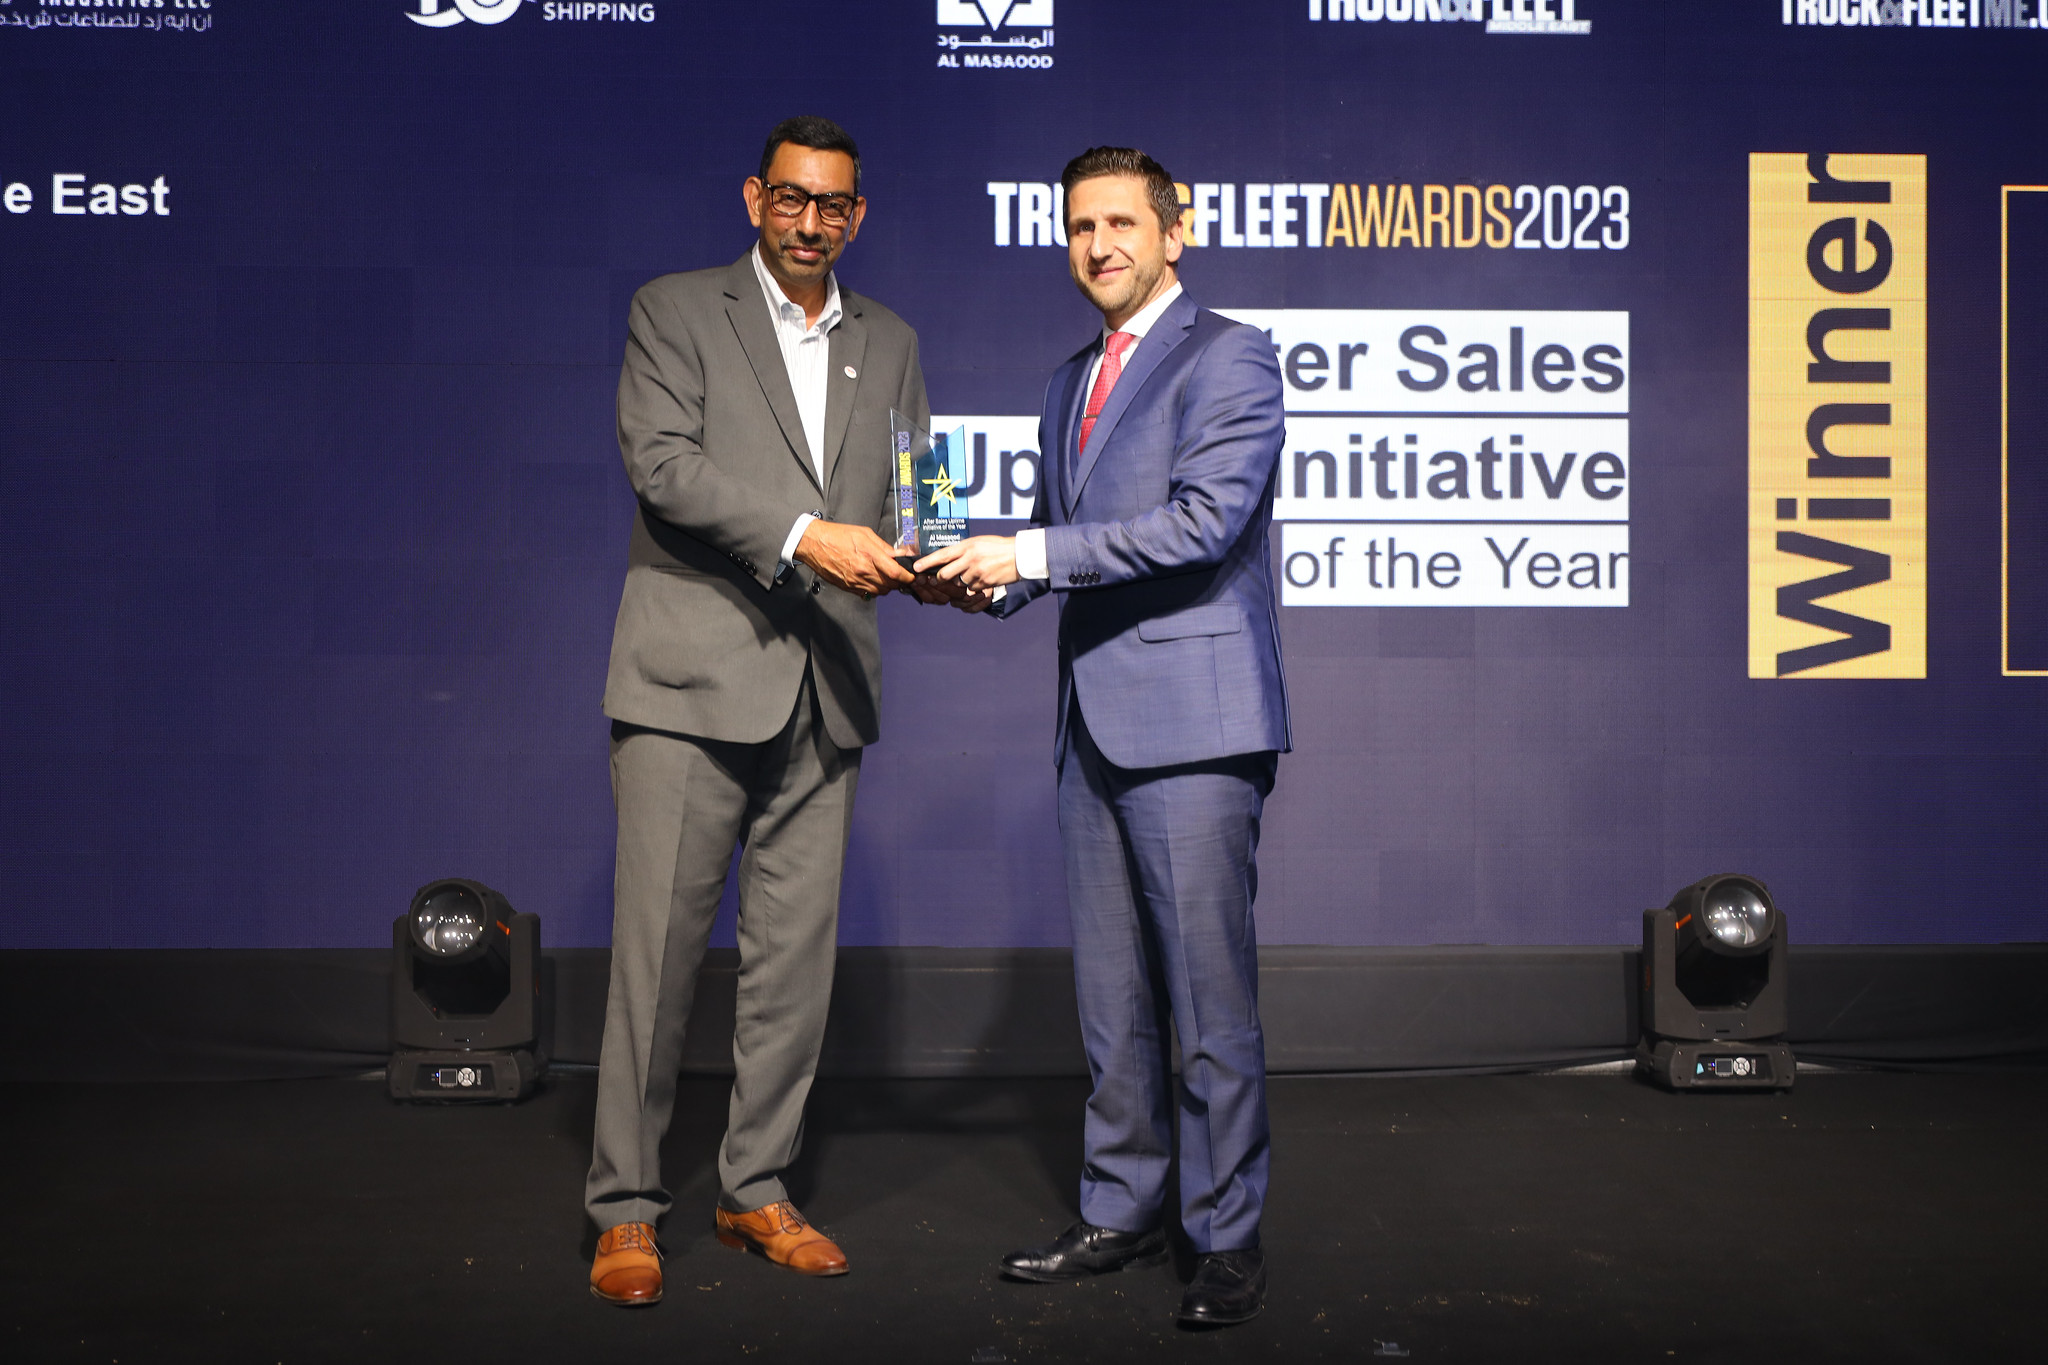 Al Masaood Automobiles Wins ‘After Sales Uptime Initiative of the Year’ Award at the Truck & Fleet Awards 2023